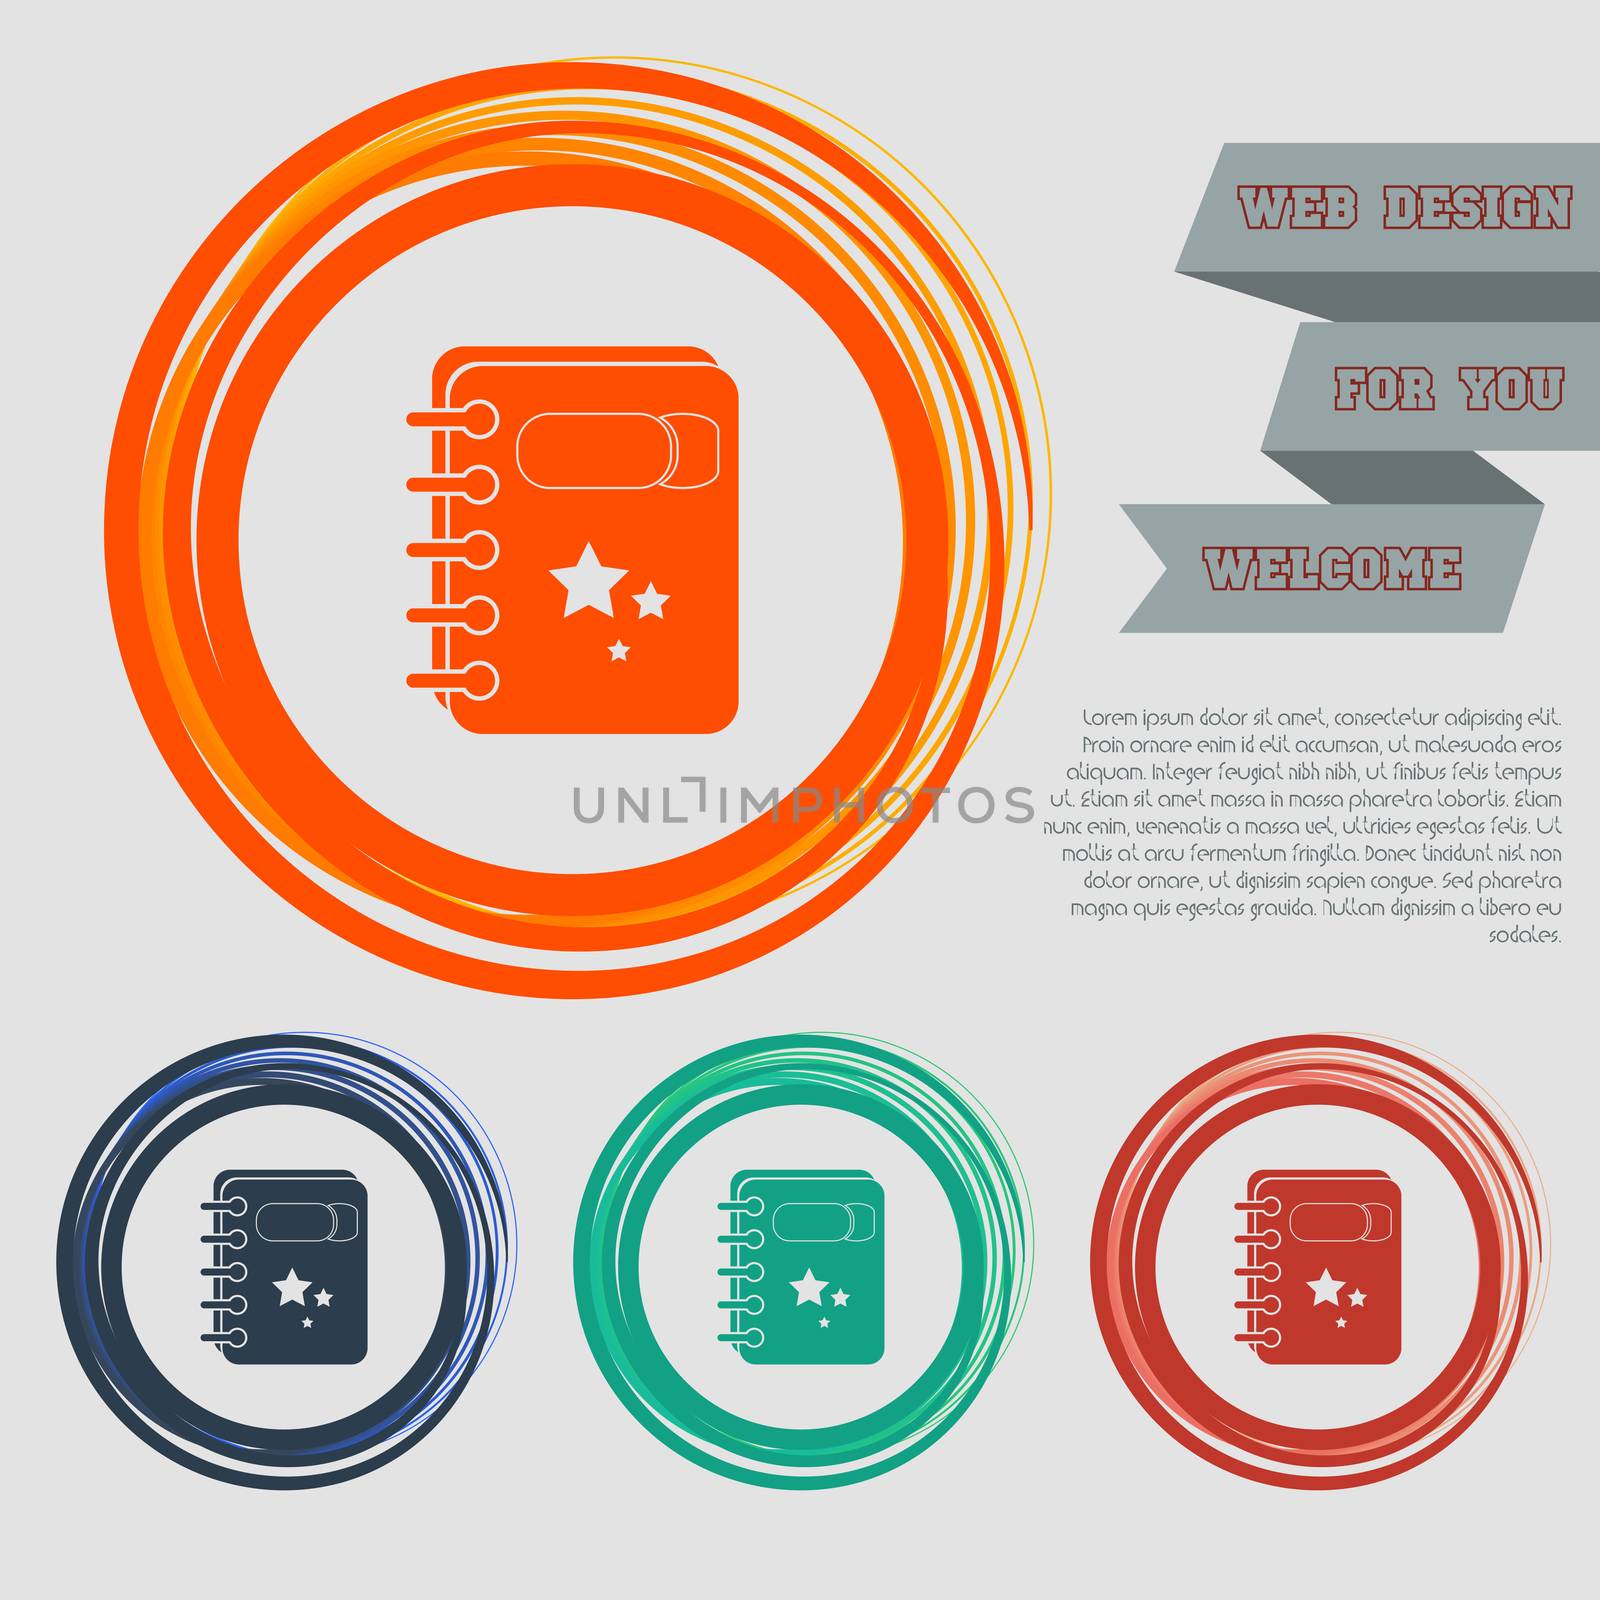 book Icon on the red, blue, green, orange buttons for your website and design with space text. illustration